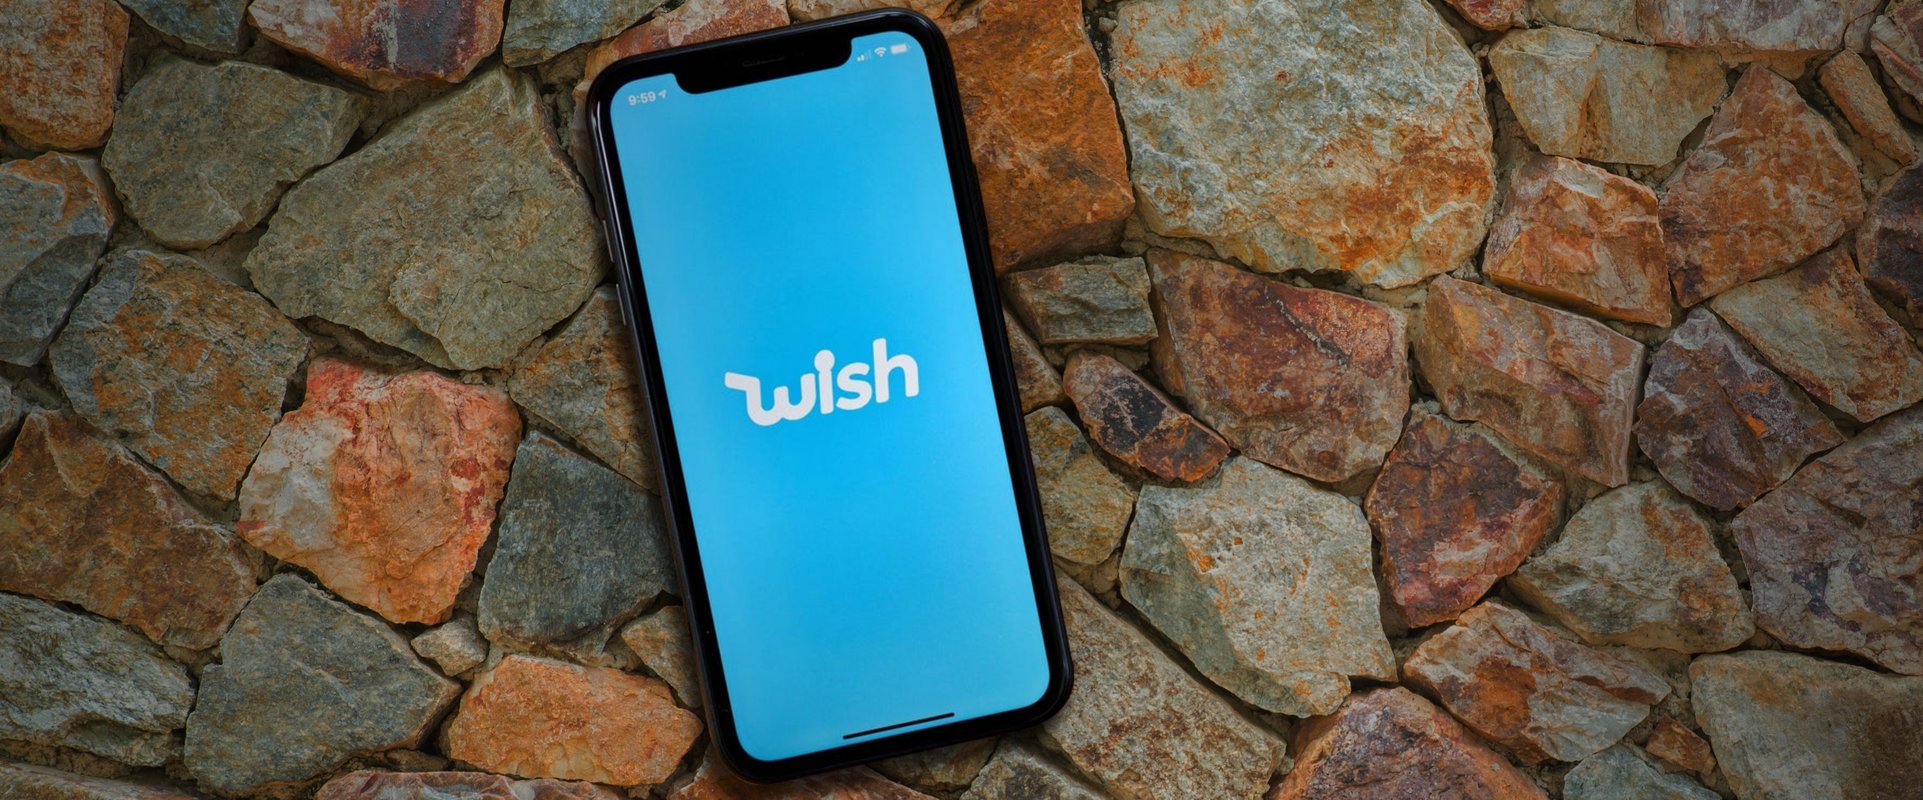 A mobile phone with a sky blue wallpaper and the WISH logo, placed atop stones.